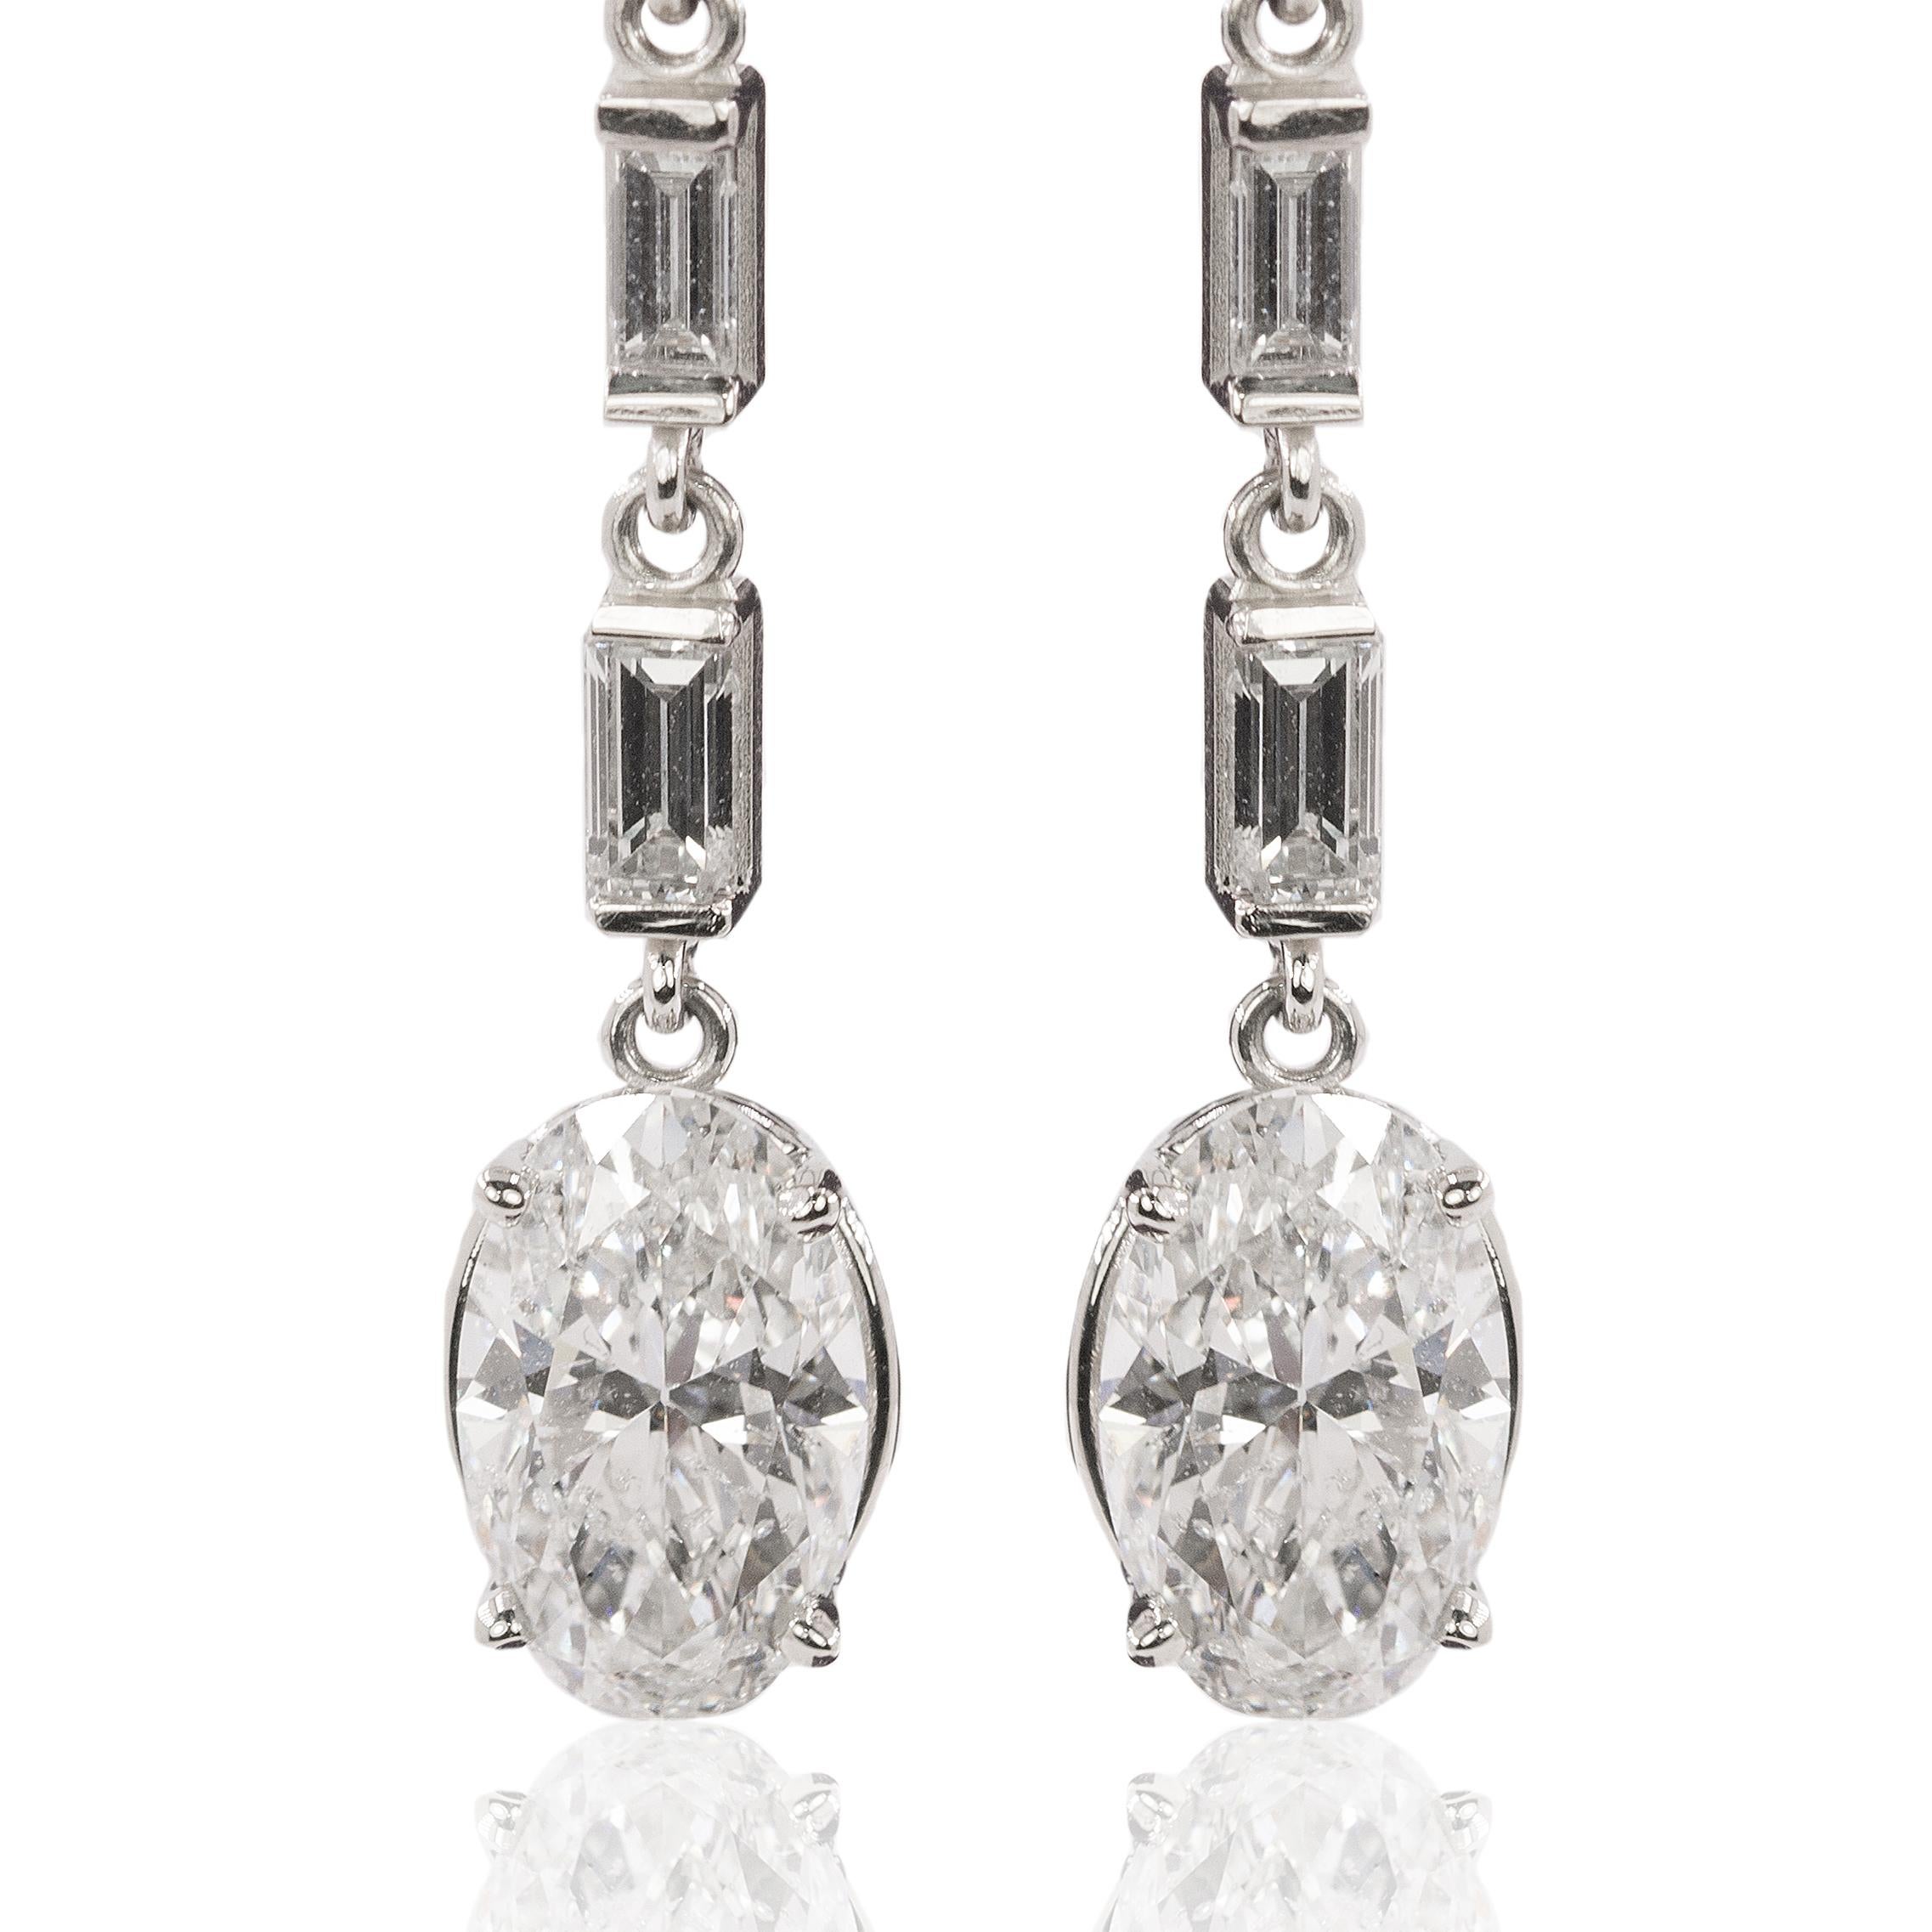 18k White gold earrings with 2 Oval Brilliant diamonds weidhing 2.82 carats and 2 pear shape diamonds weighing 1.21 and 6 straight baguete cut diamonds weighing 0.80 carats. 